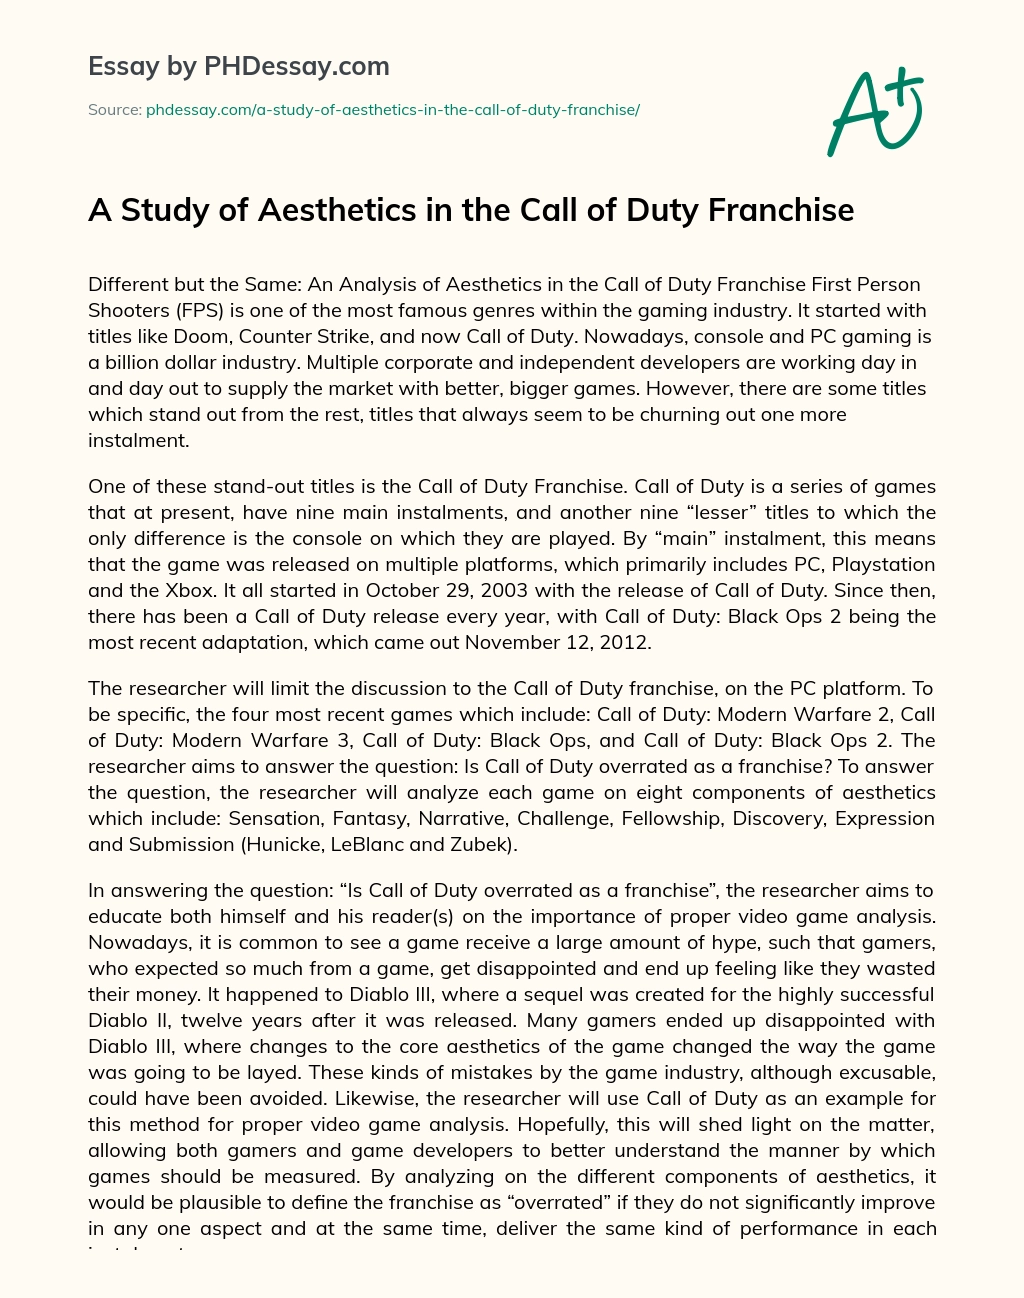 A Study of Aesthetics in the Call of Duty Franchise essay